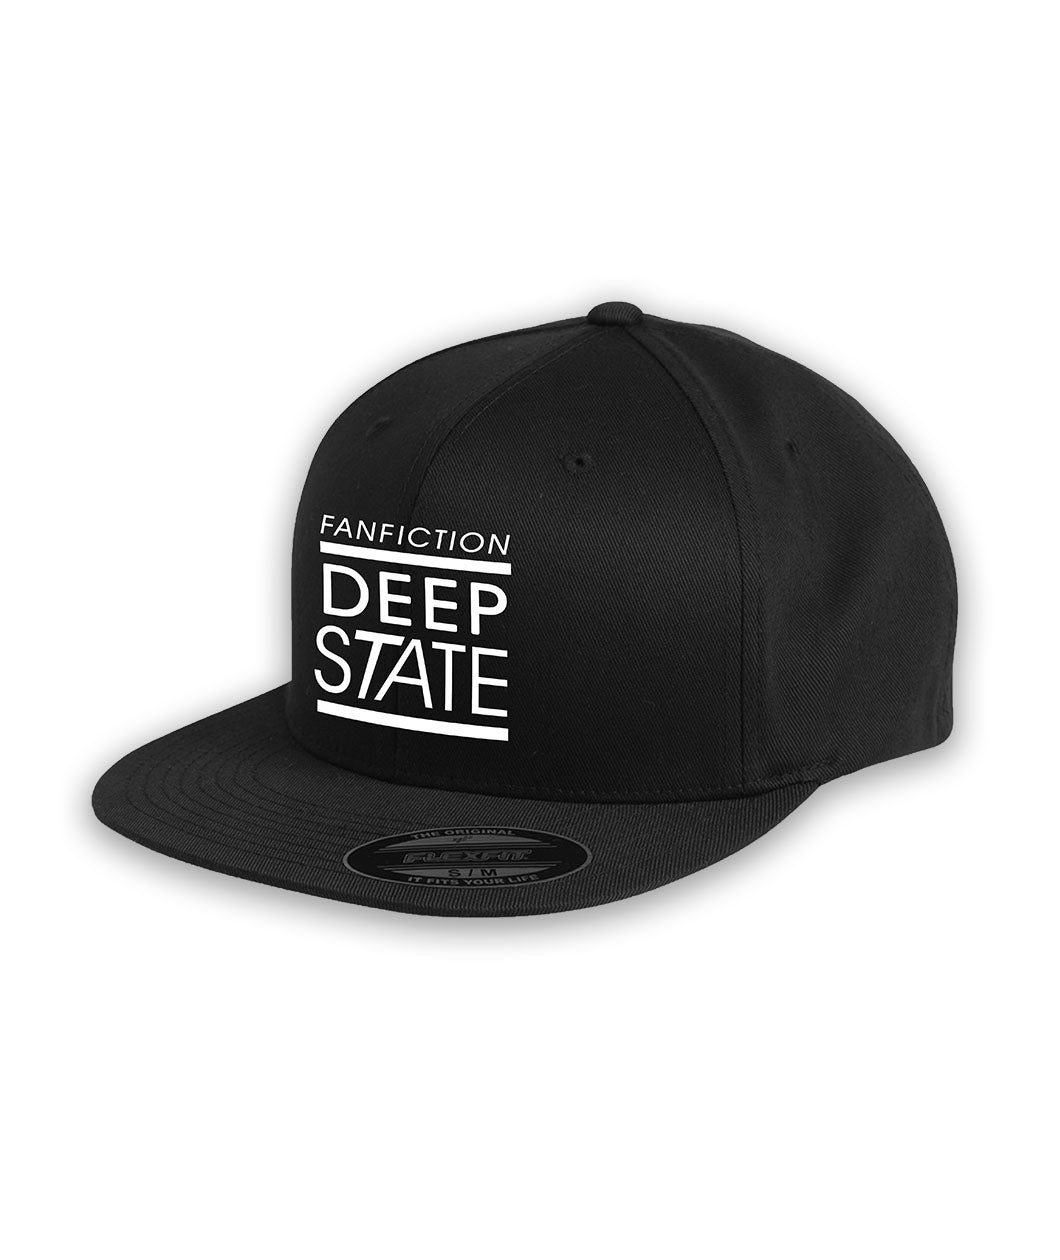 Black hat with “Fanfiction Deep State” in sans serif font on front center of hat. Two horizontal white lines surround “Deep State” - from Lindsay Ellis